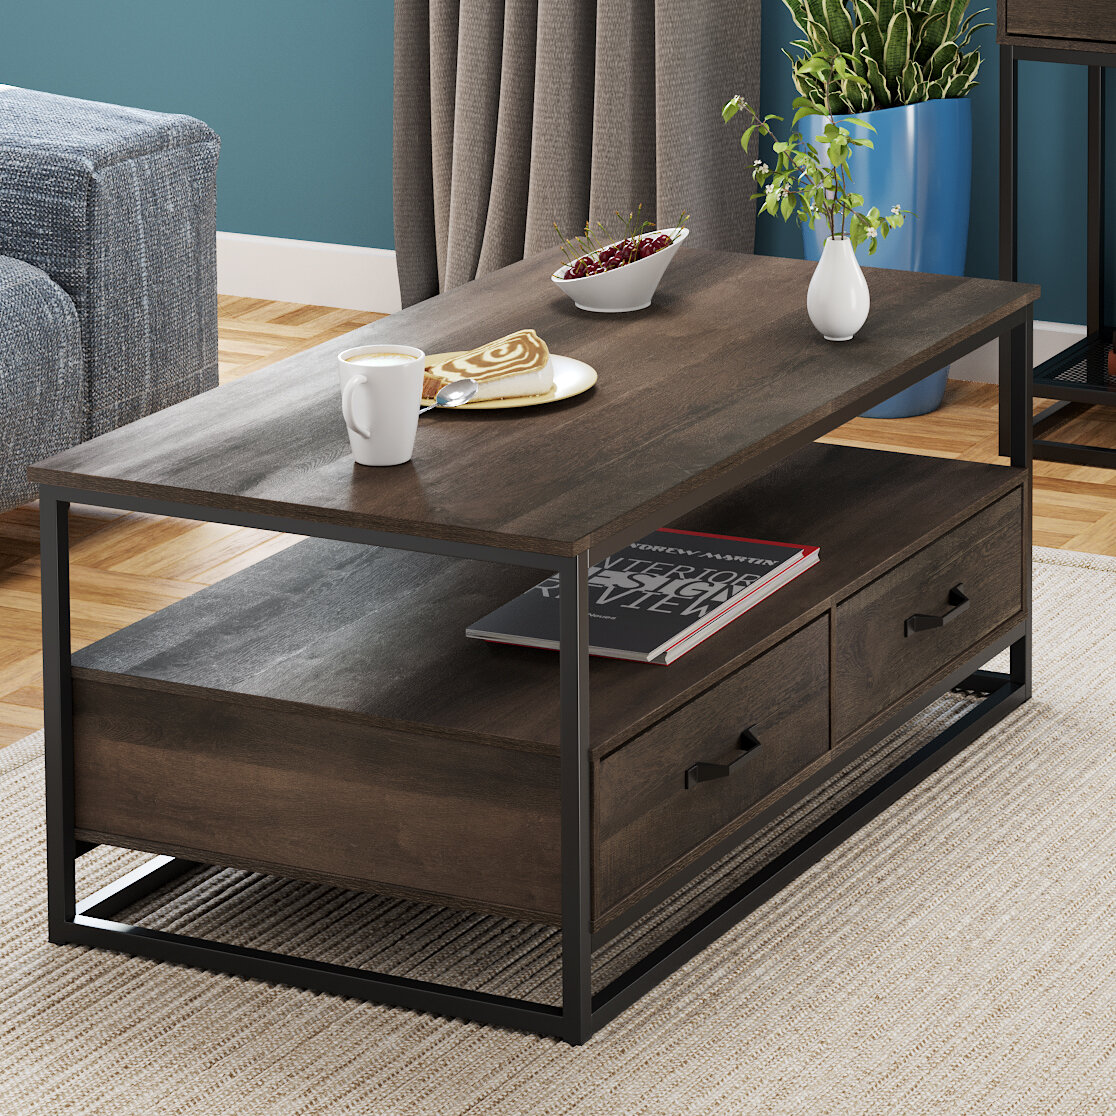 wooden coffee table with drawers